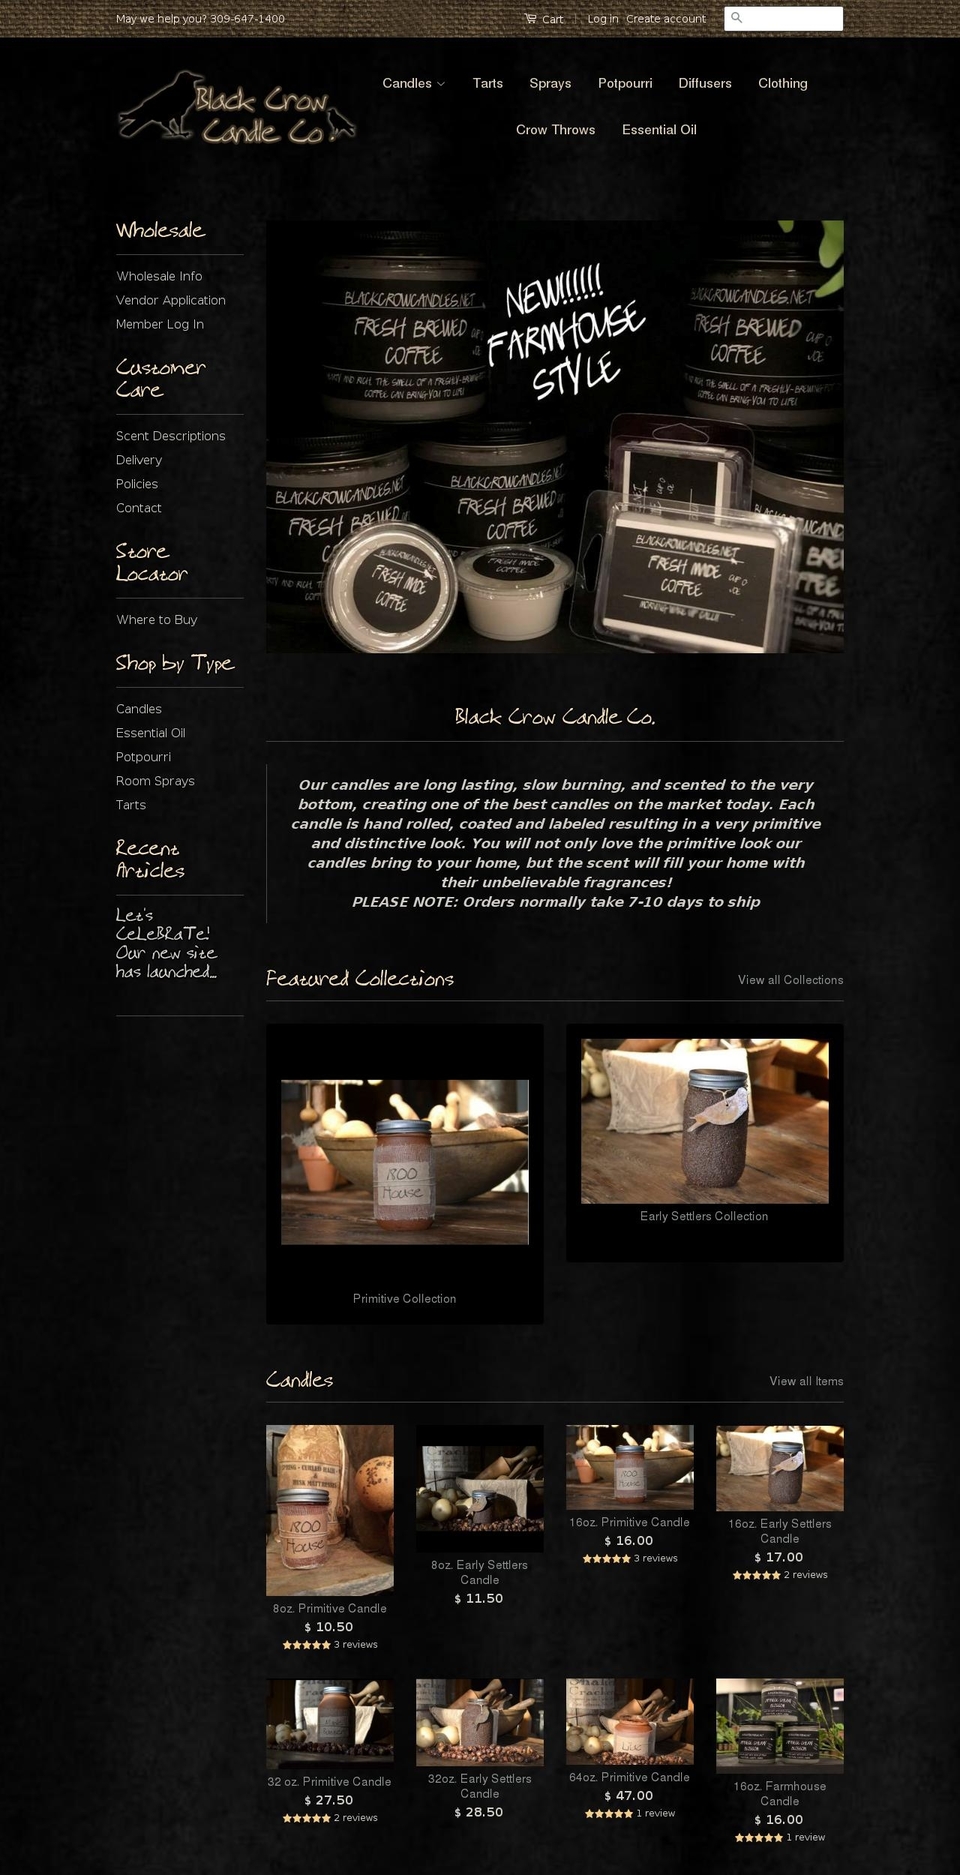 Copy of Classic good Shopify theme site example blackcrowcandles.org